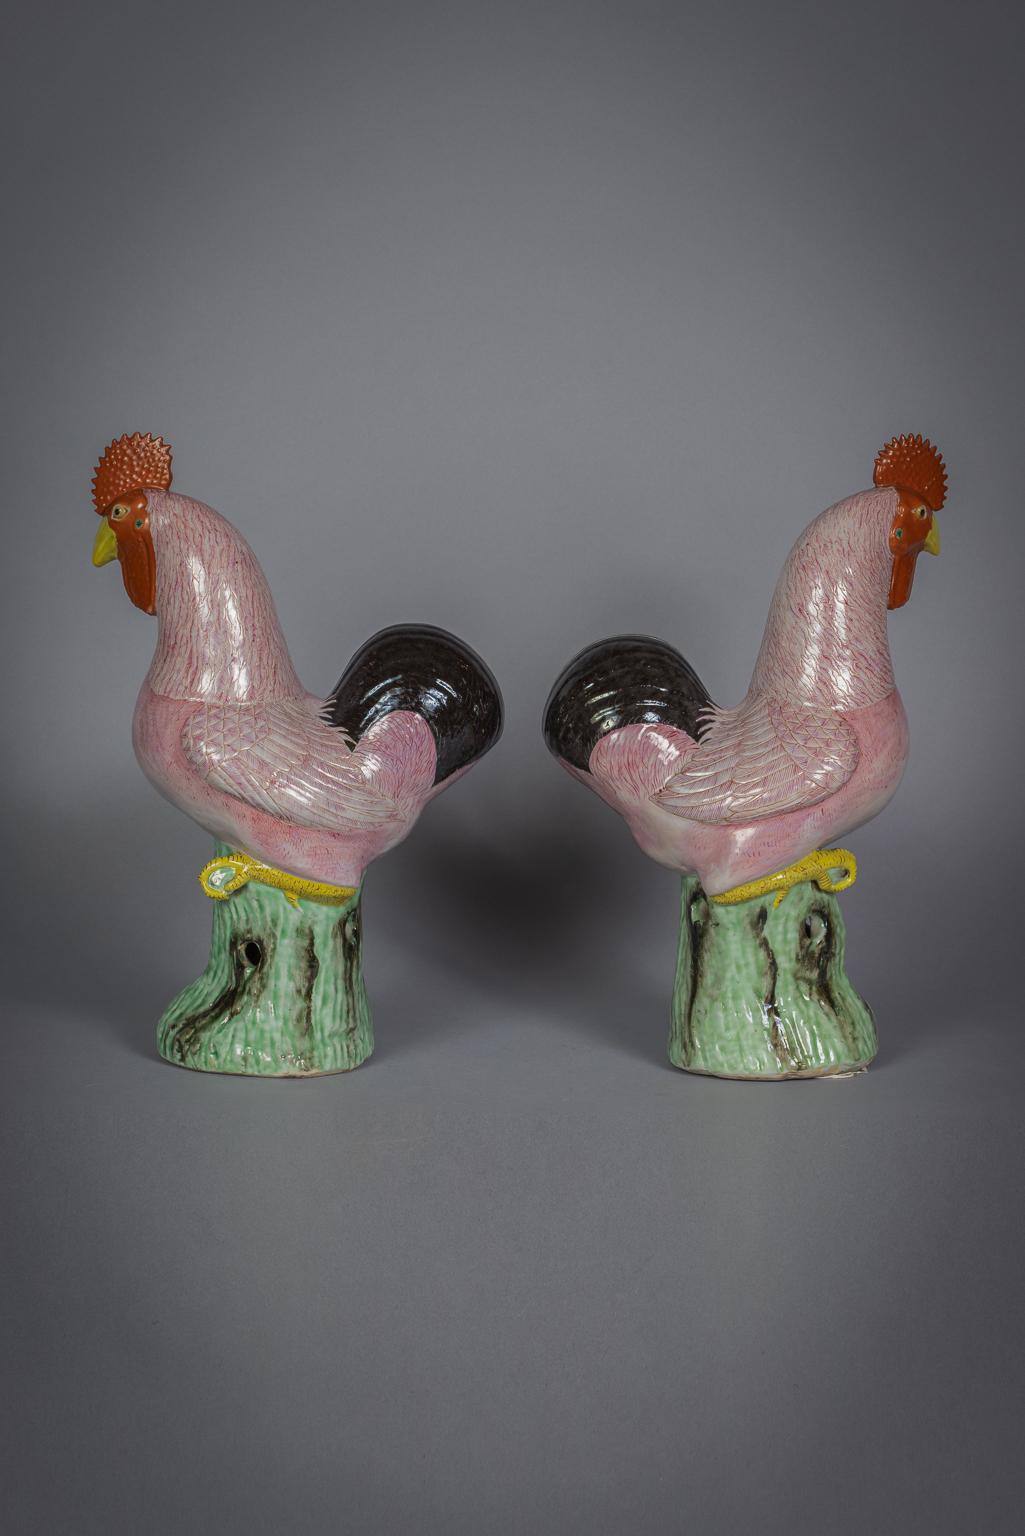 Pair of Chinese Porcelain roosters, circa 1800.